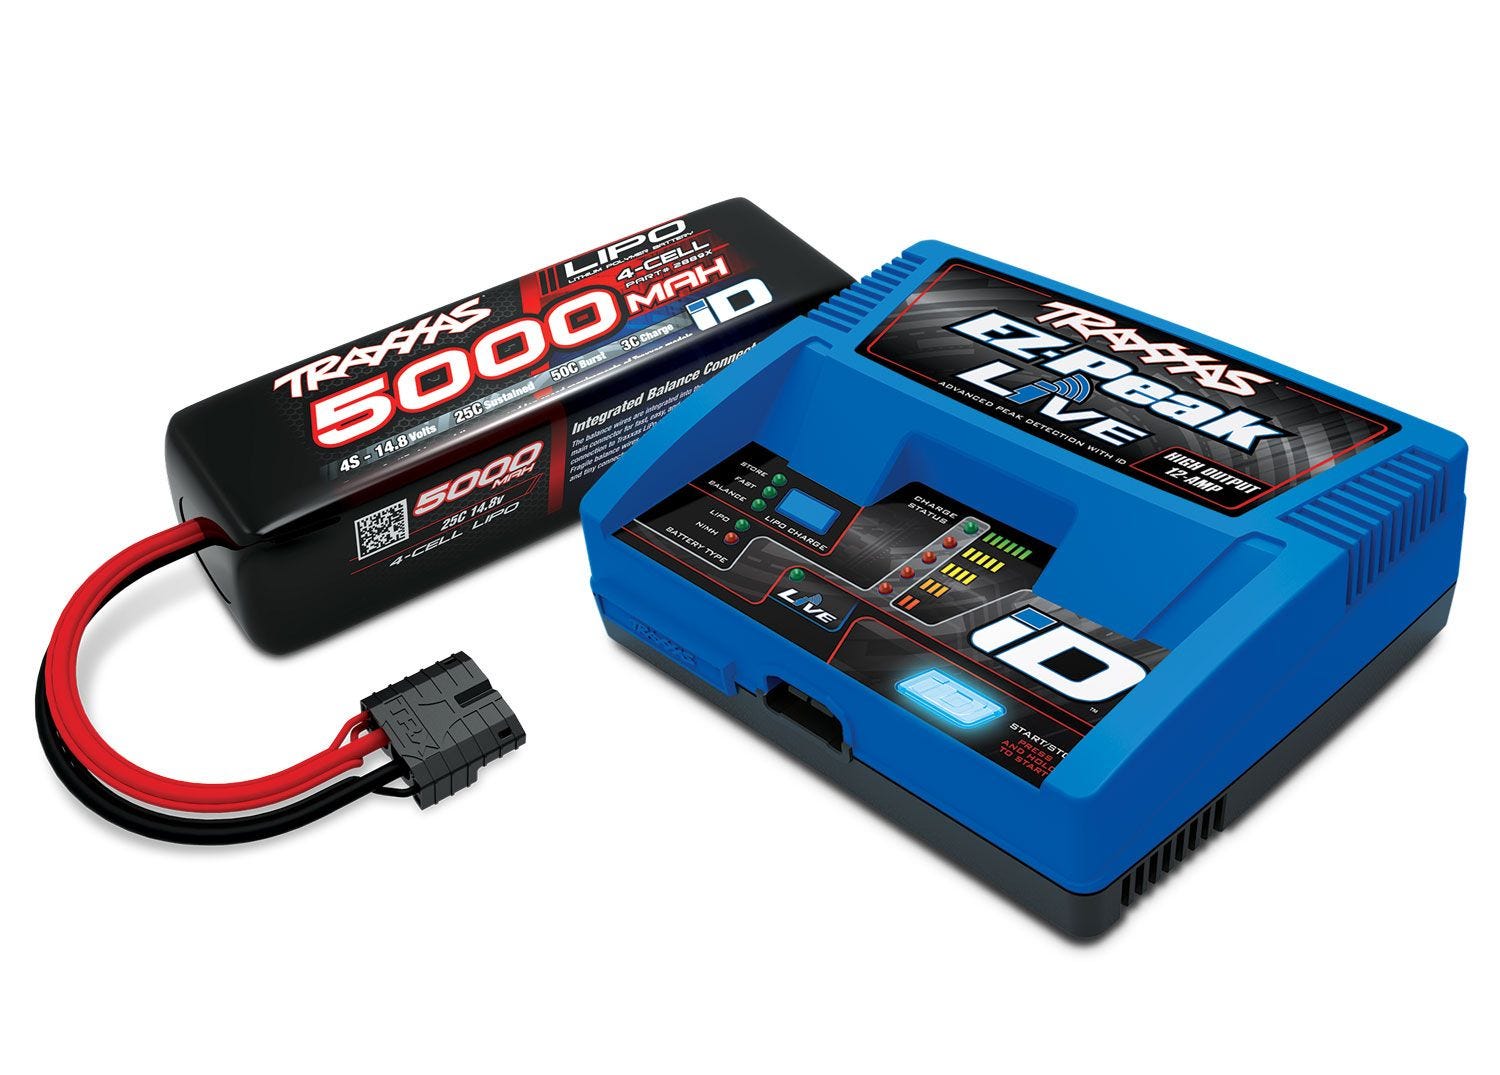 traxxas-2996GX-4S-Battery-and-Charger-Completer-Pack-mit-einem-Akku-4S-5000-mAh